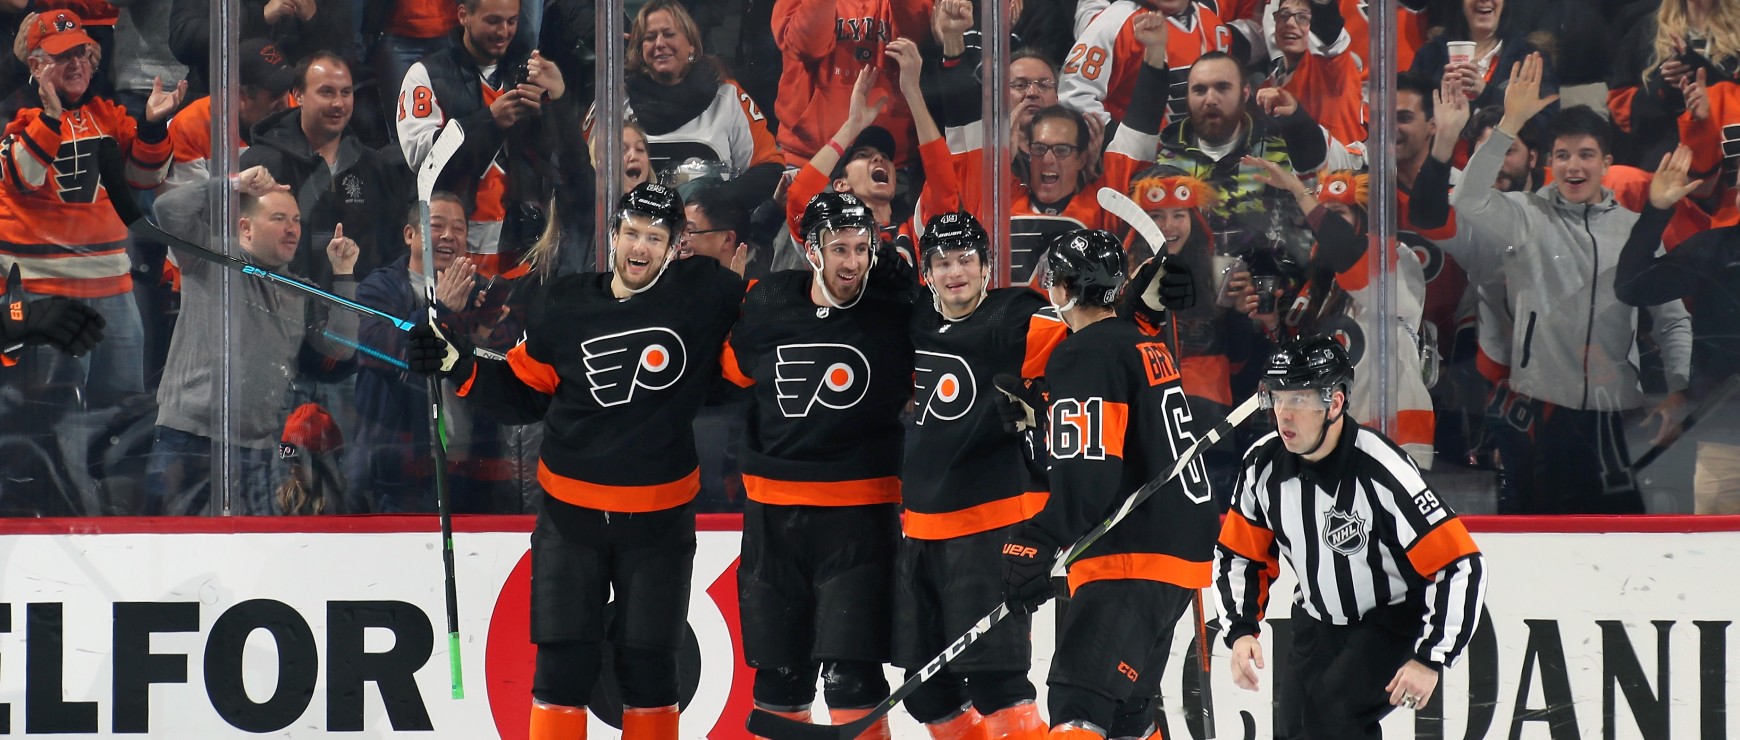 Shayne Gostisbehere, Claude Giroux, Nolan Patrick, and Sean Couturier celebrating together on the ice during a game night at the Wells Fargo Center